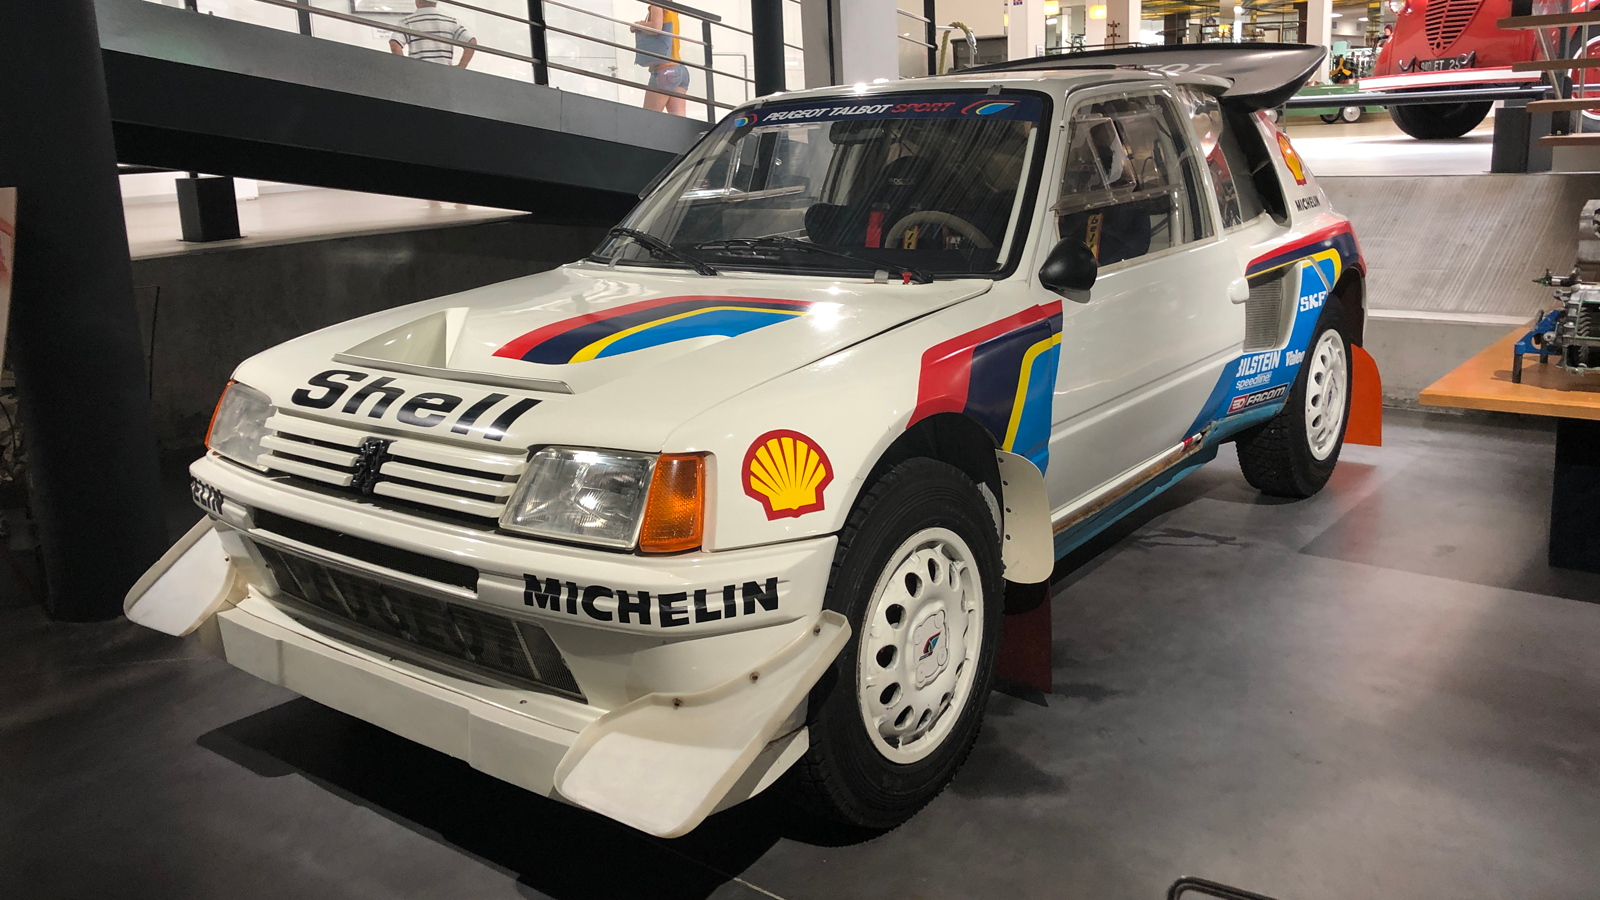 Touring the treasures of Peugeot’s museum